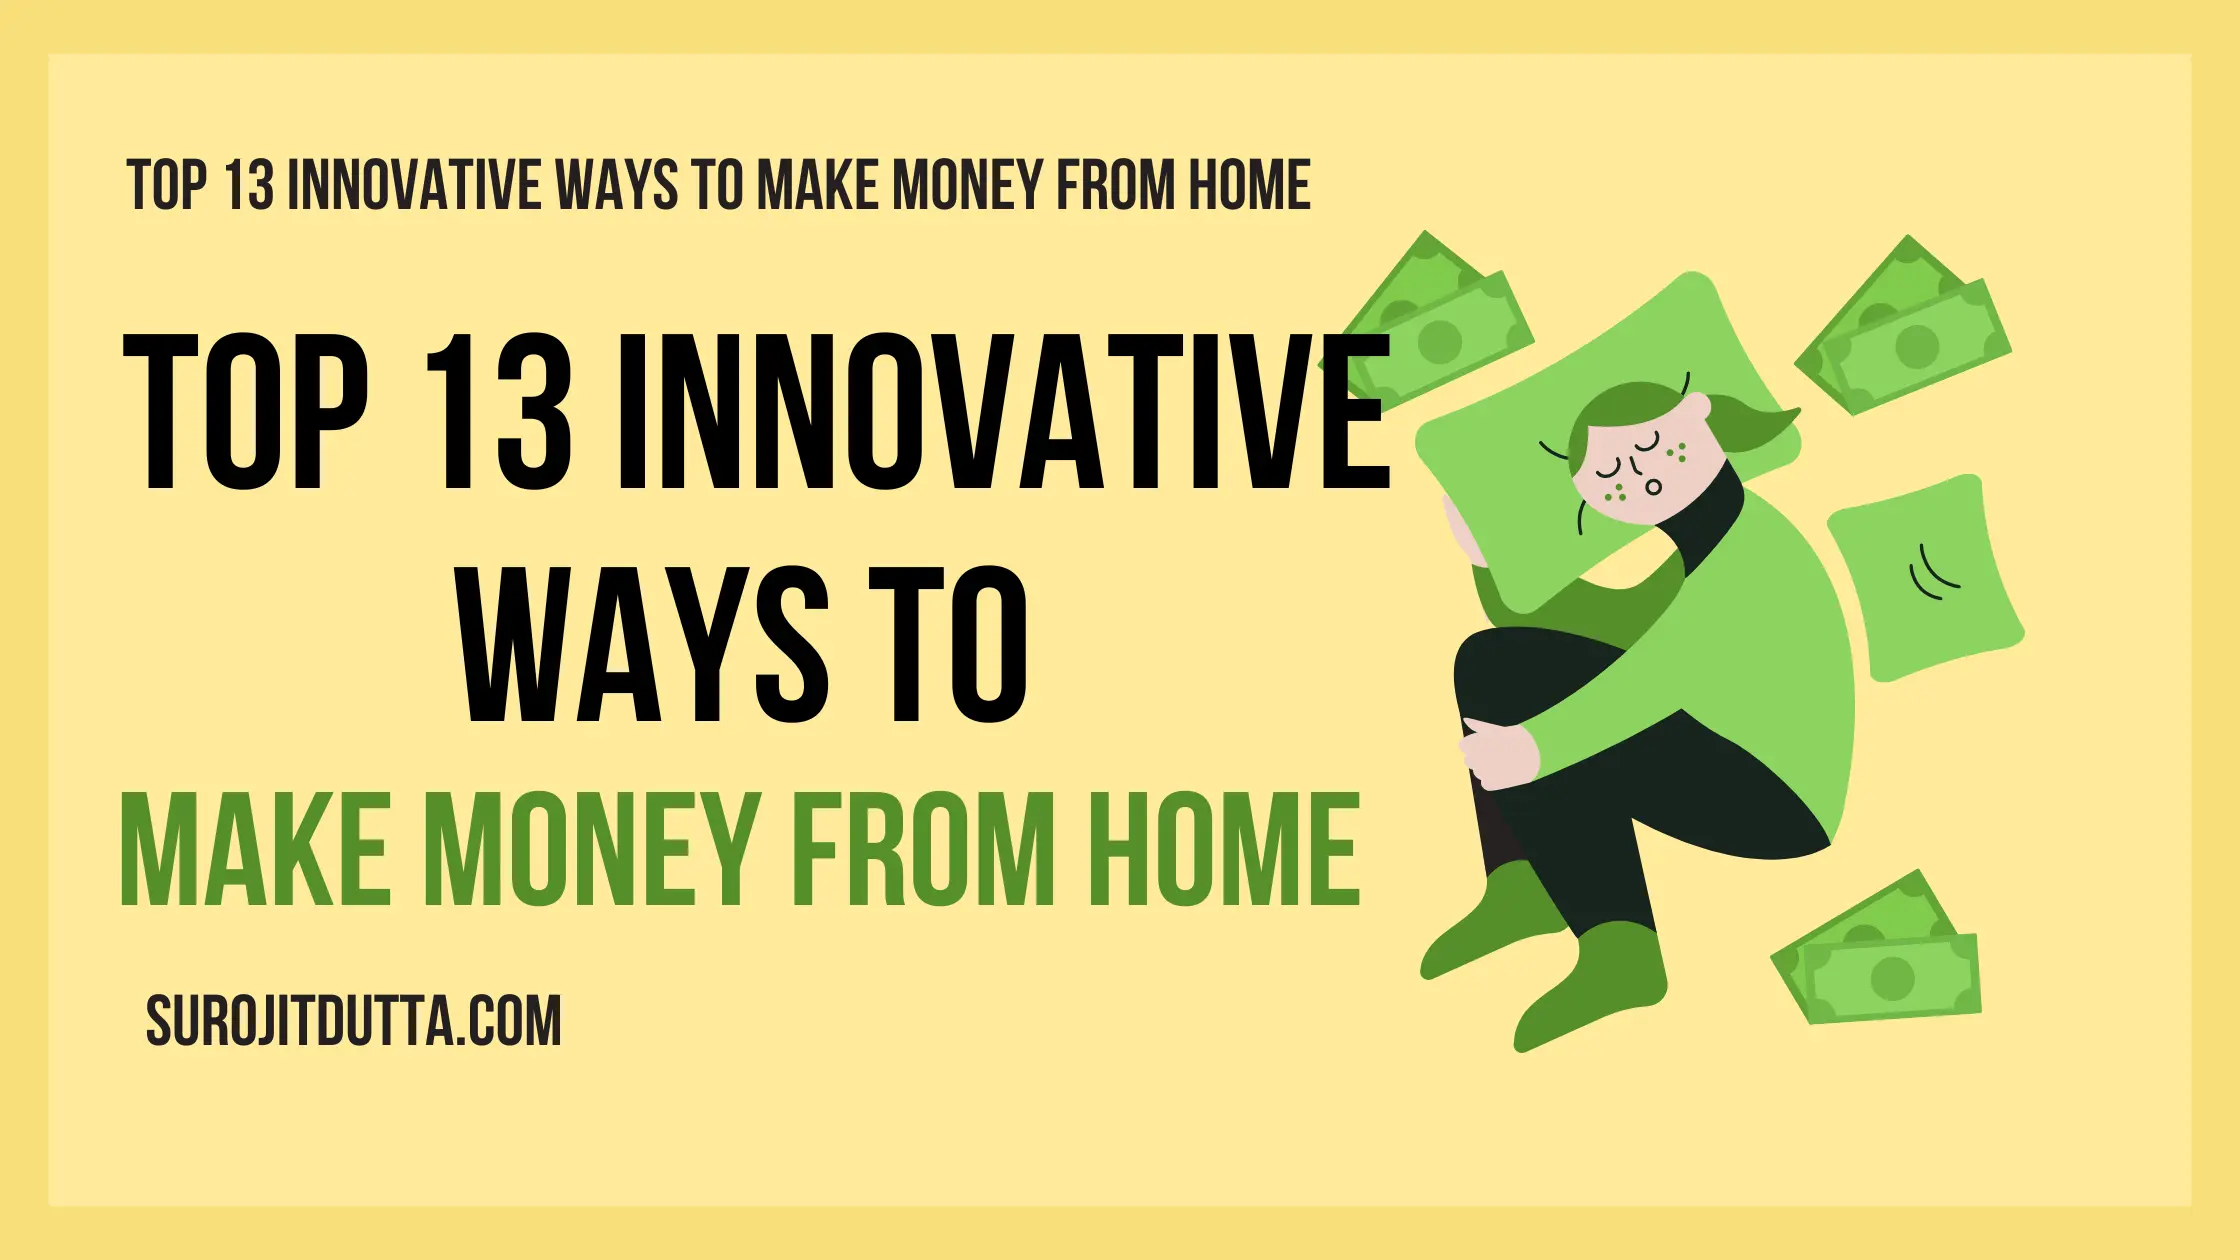 Top 13 Innovative Ways to Make Money From Home